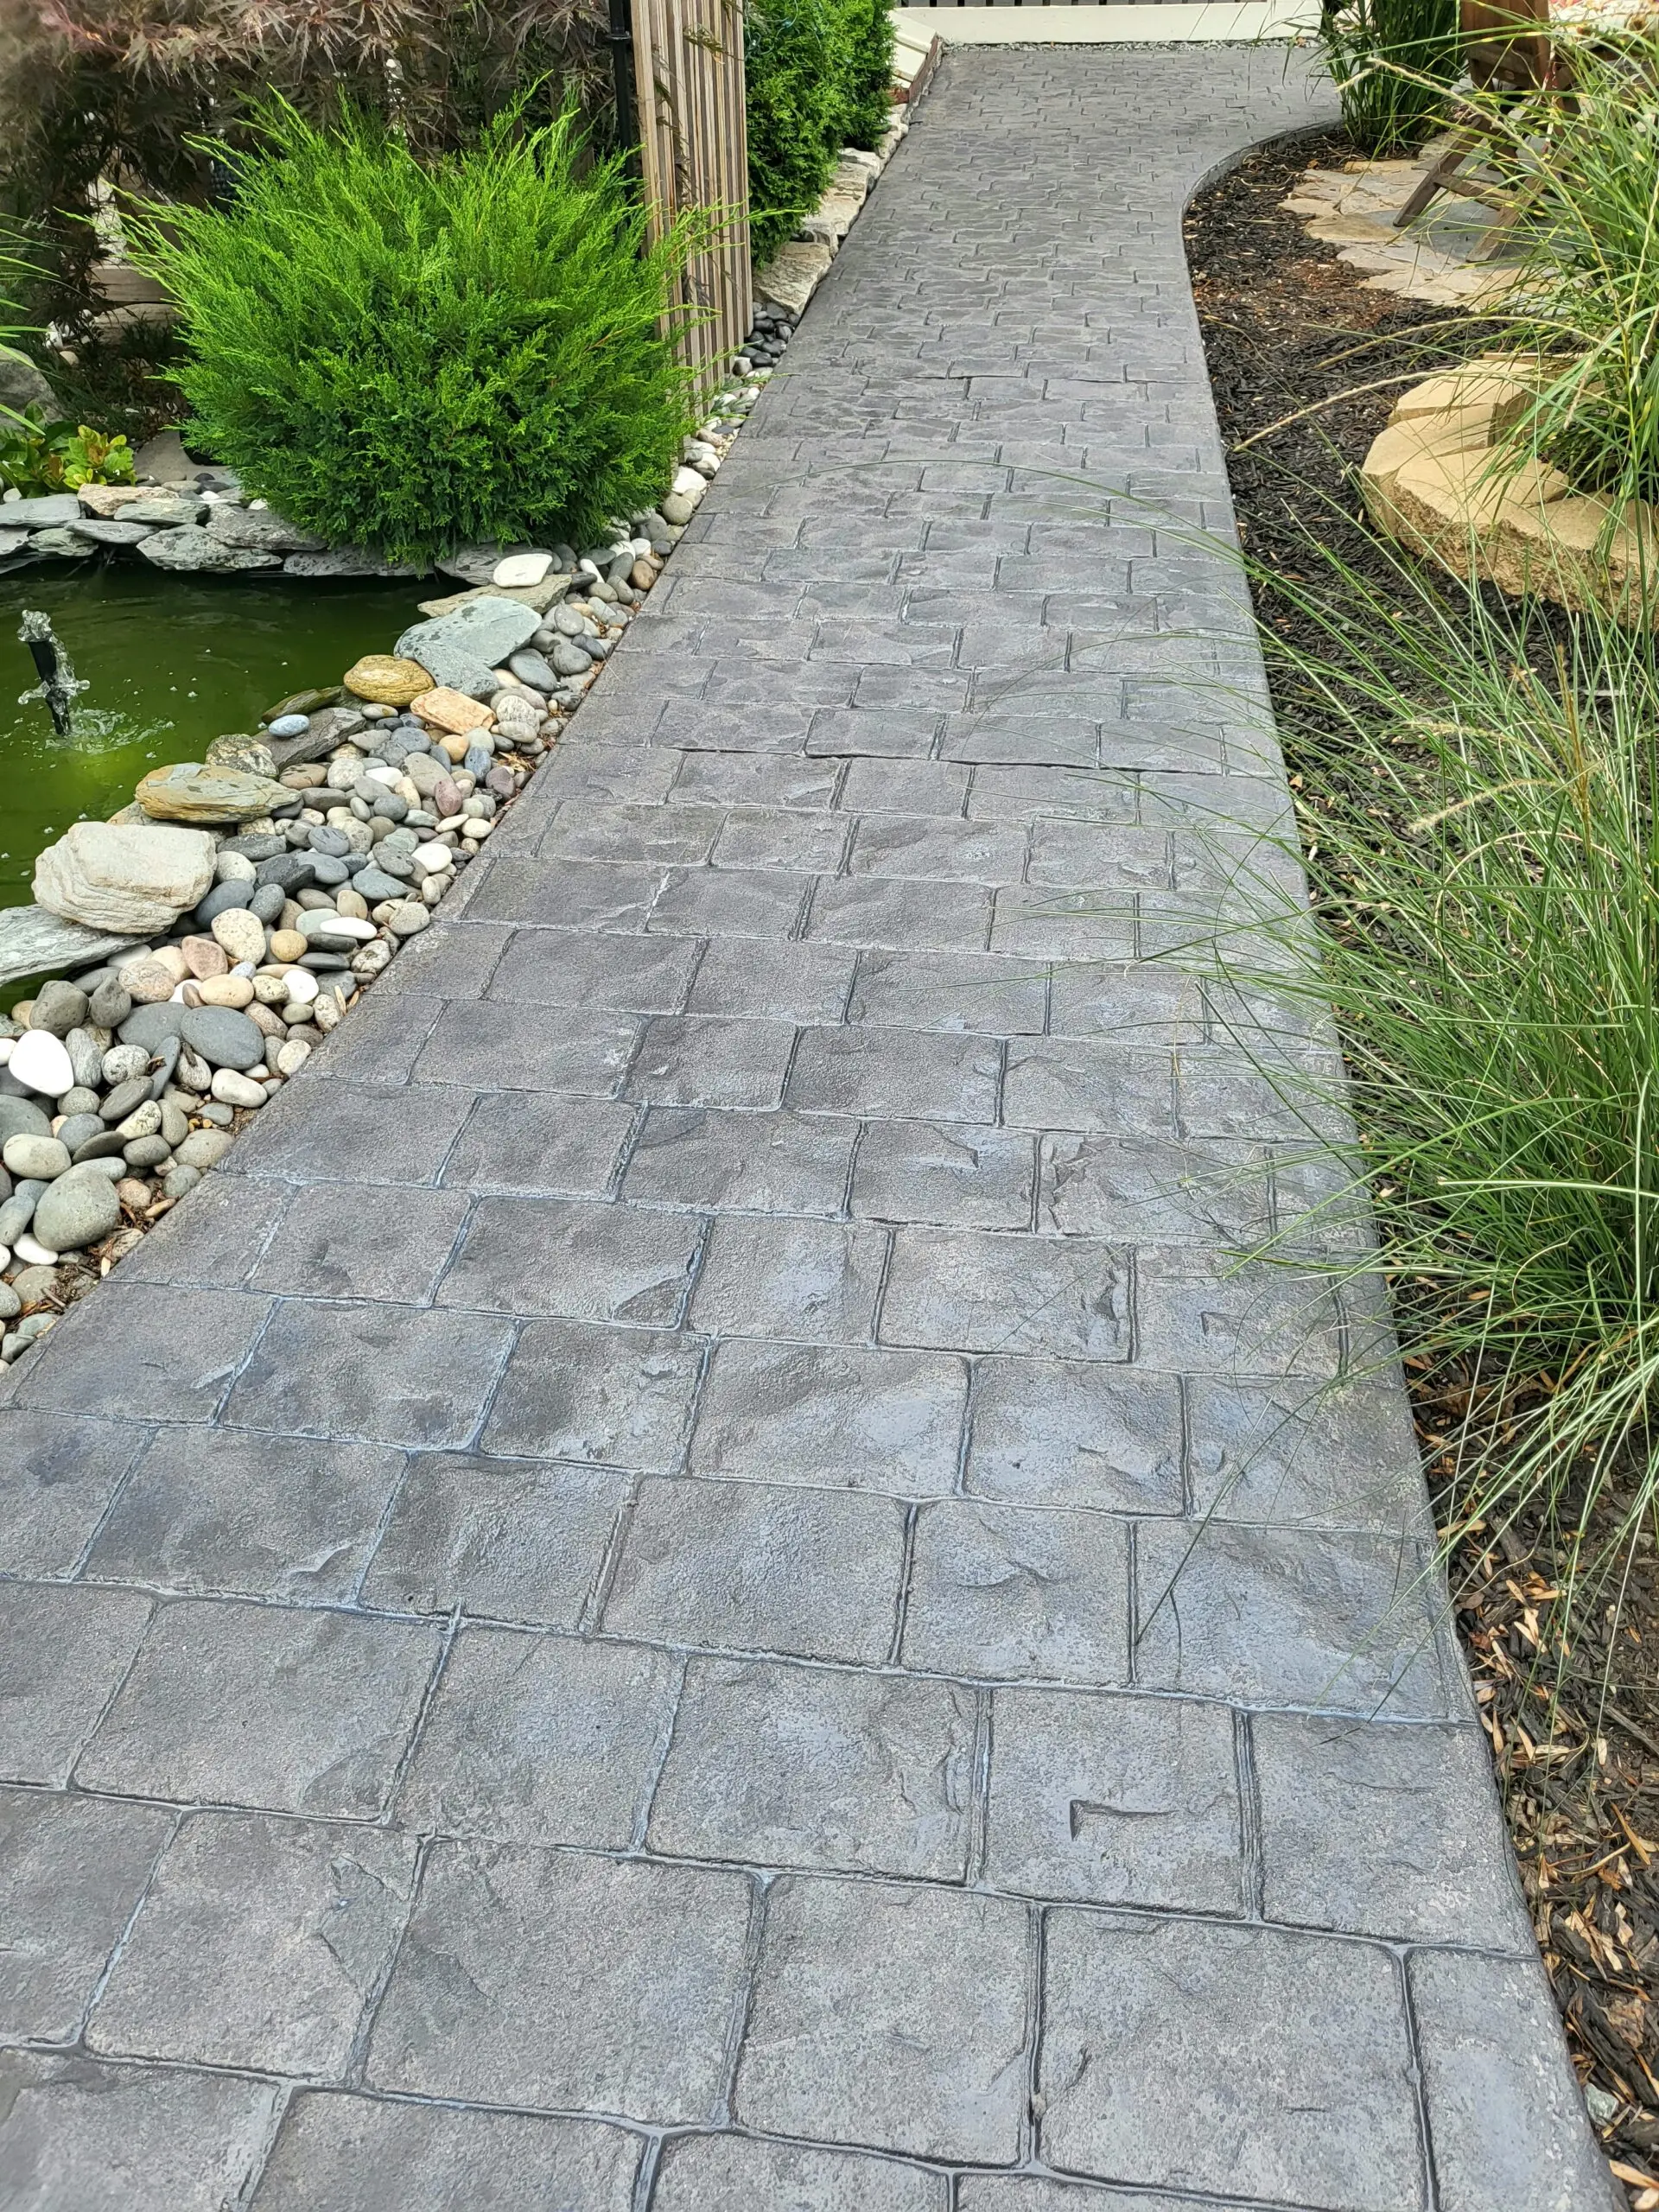 A narrow stamped concrete walkway stained gray runs alongside a tranquil garden pond